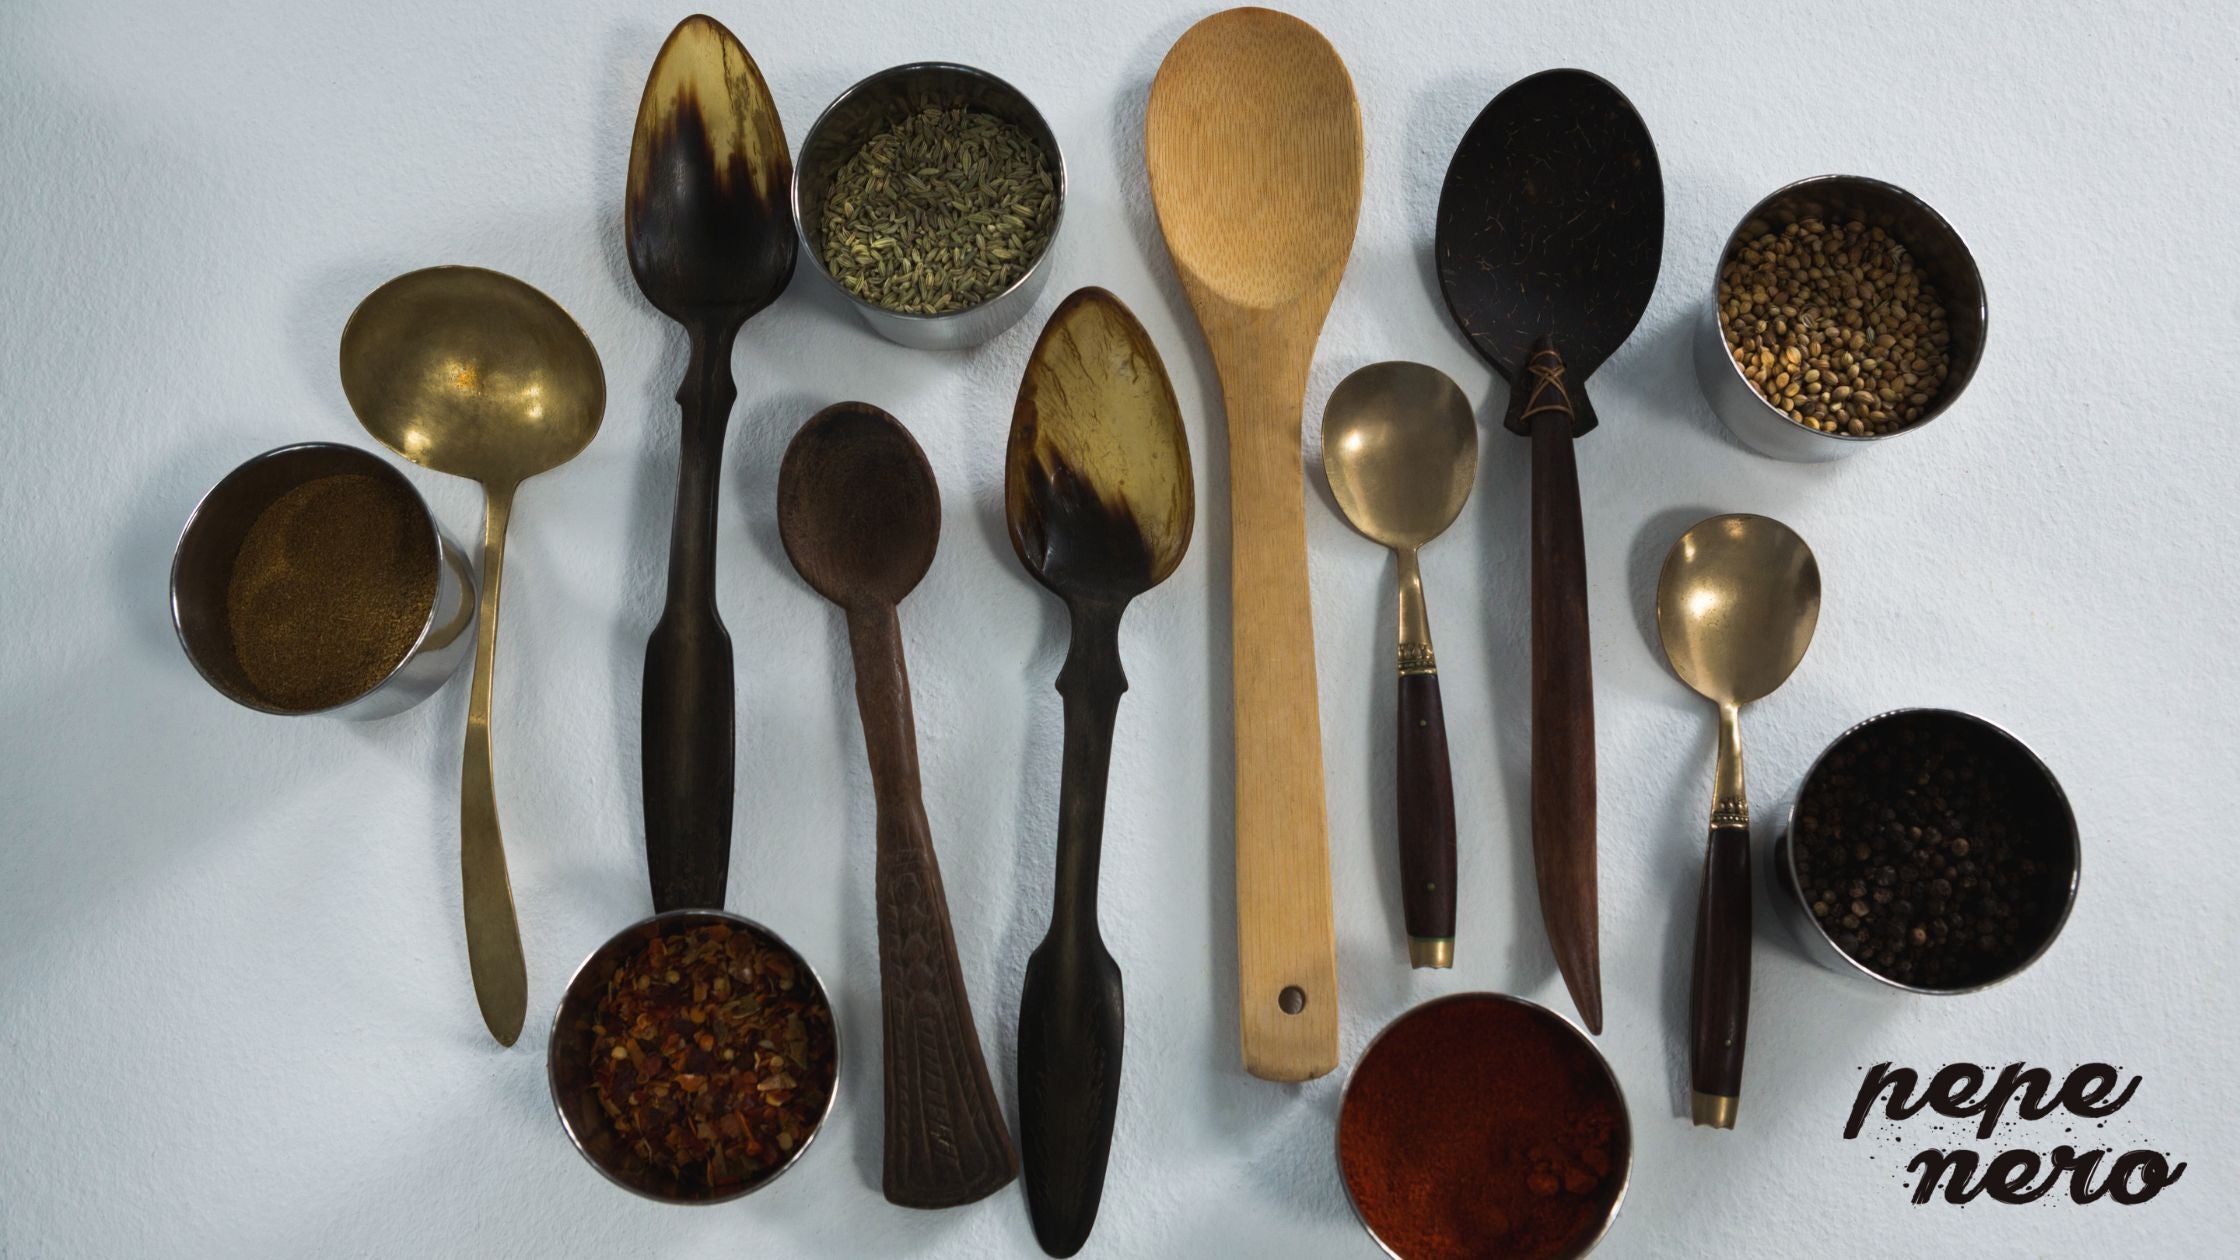 Spoon, Dinner Spoon, Coffee Spoon, Silicone Mixing Spoons